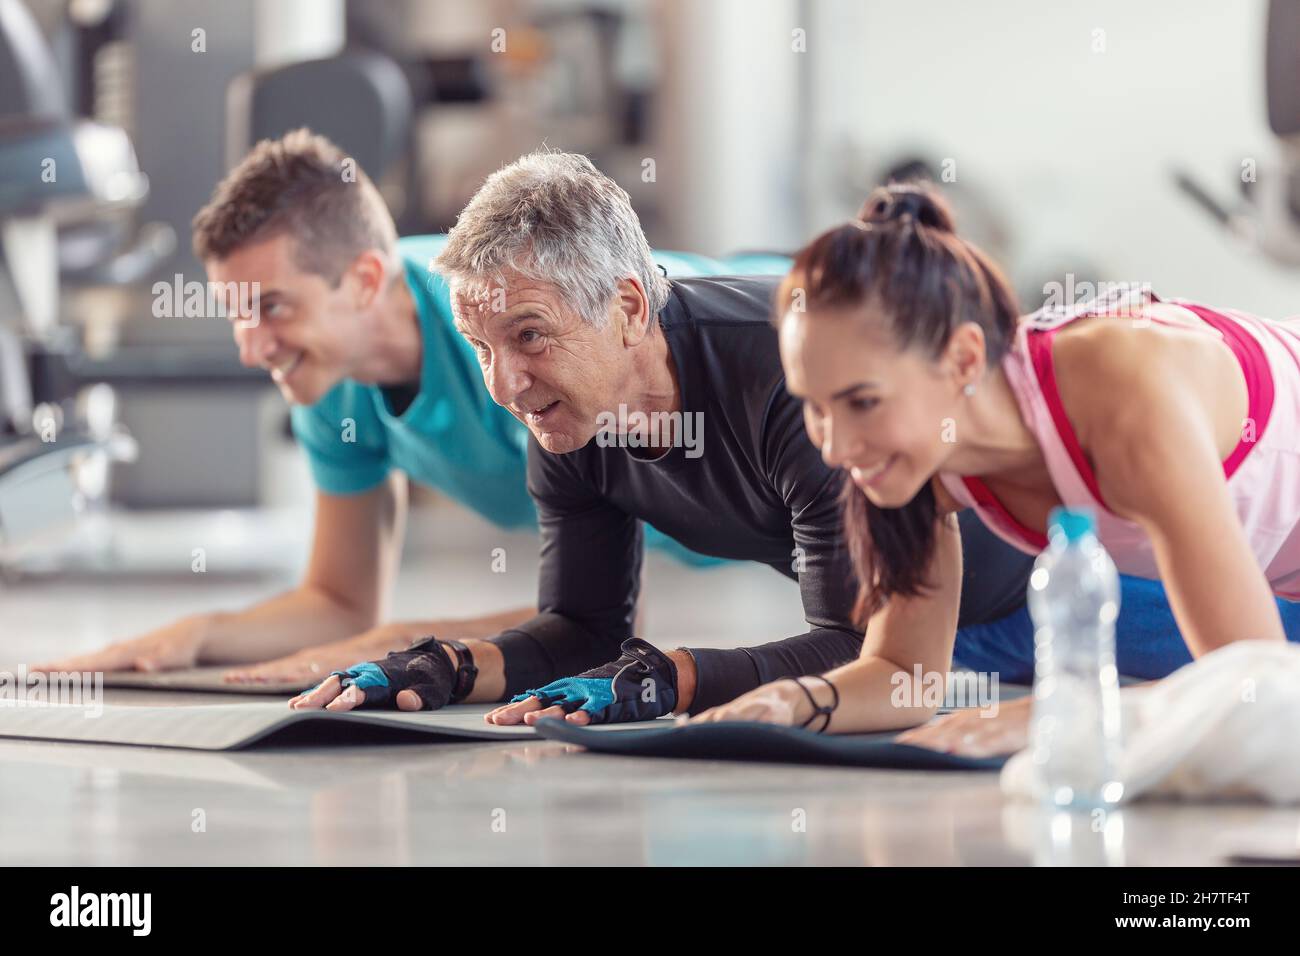 Group of people in various age and gender having fun while doing group exercise of elbow plank in the gym. Stock Photo